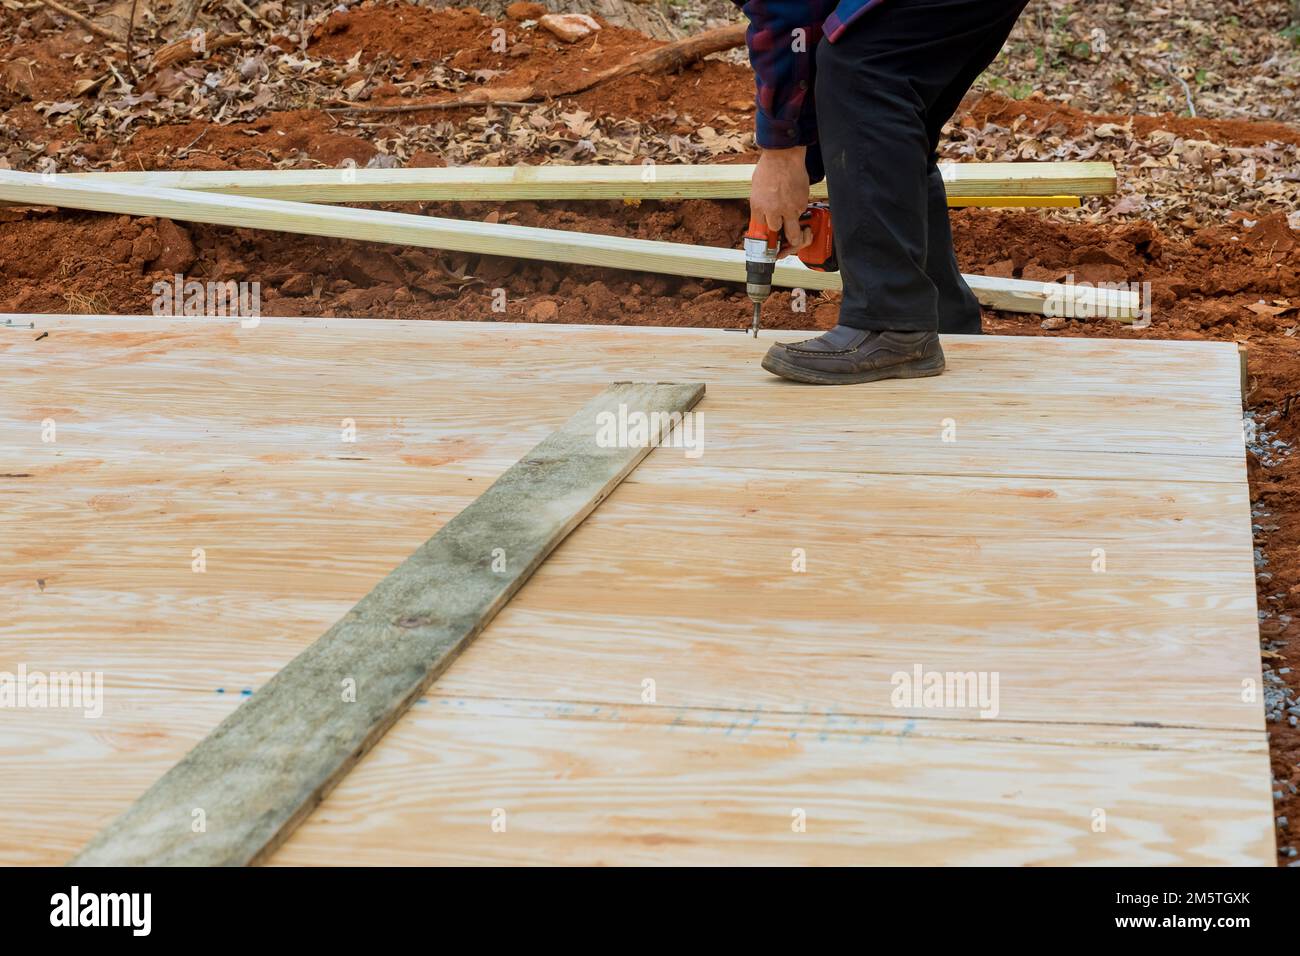 Building shed deck foundation using wood framing beams stick framework is an excellent idea Stock Photo